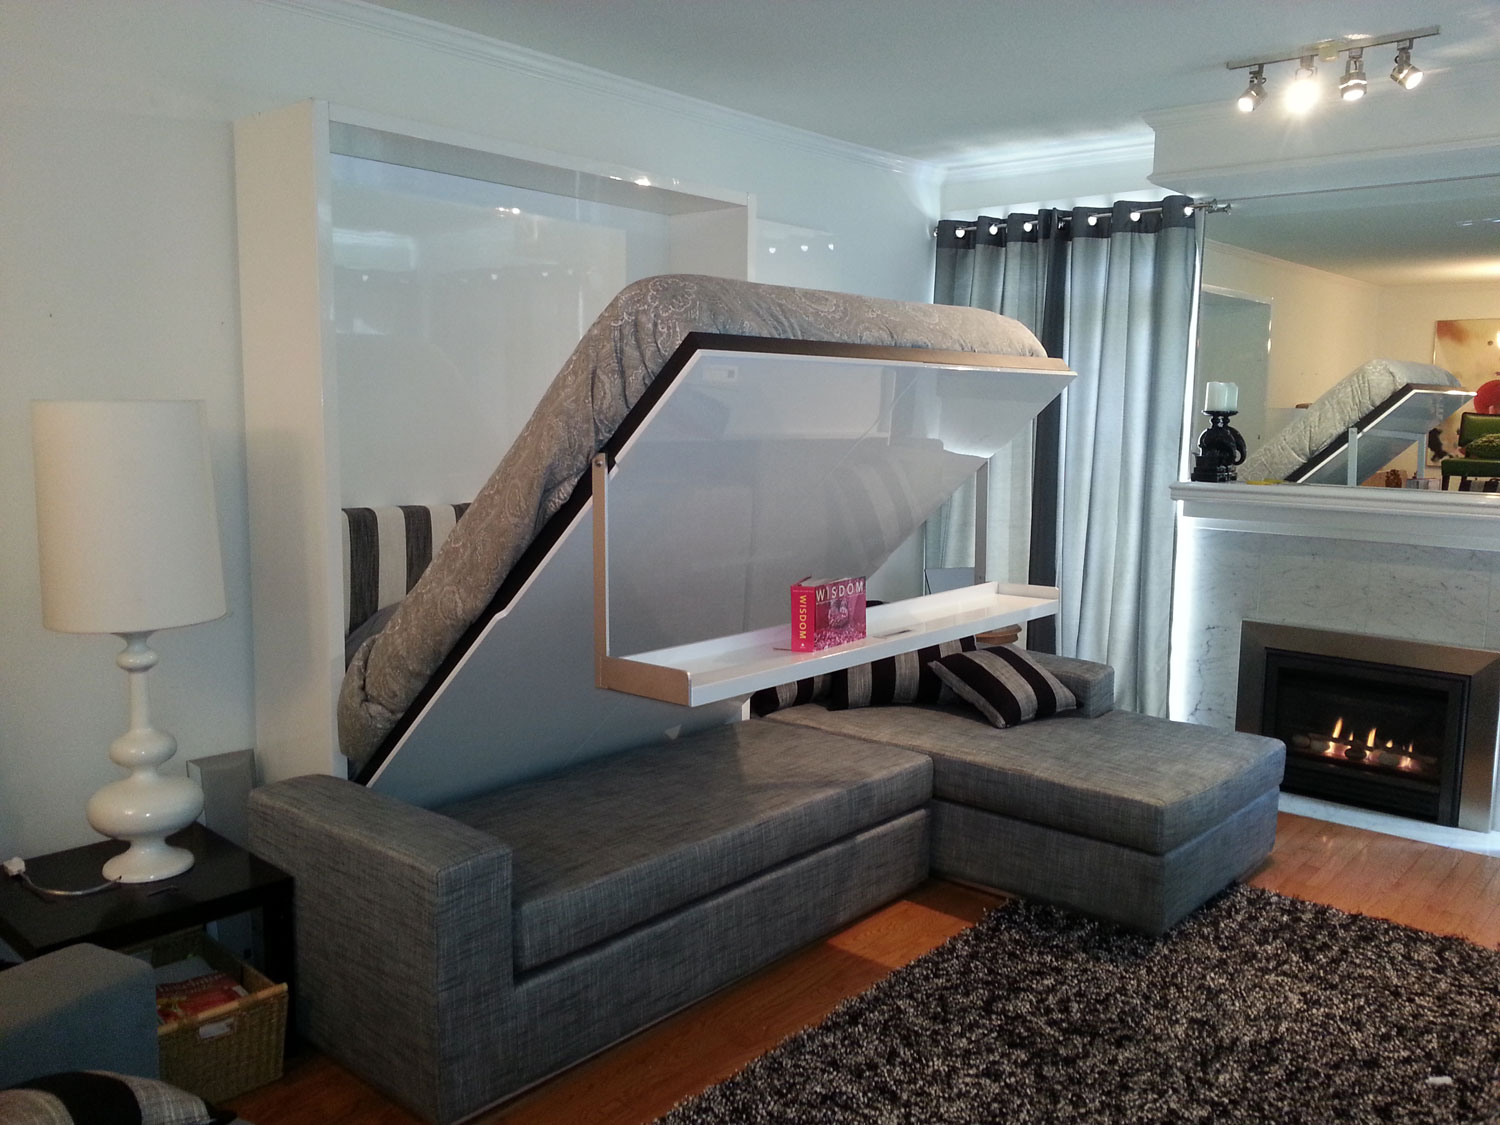 MurphySofa smart furniture - Wall beds, Transformable Tables and ...